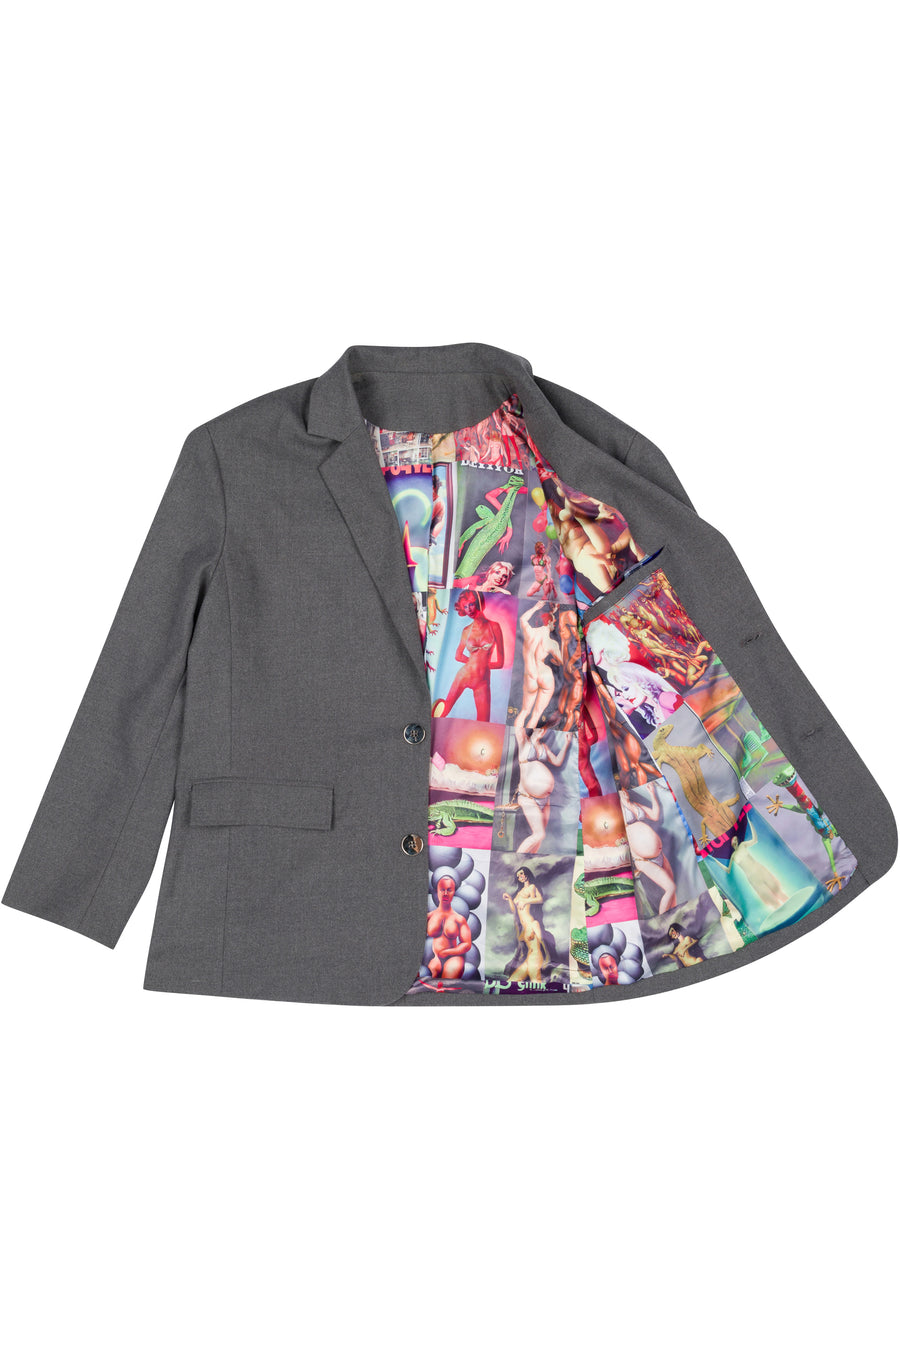 Unisex Gray Business Man Blazer with AI Collage Lining